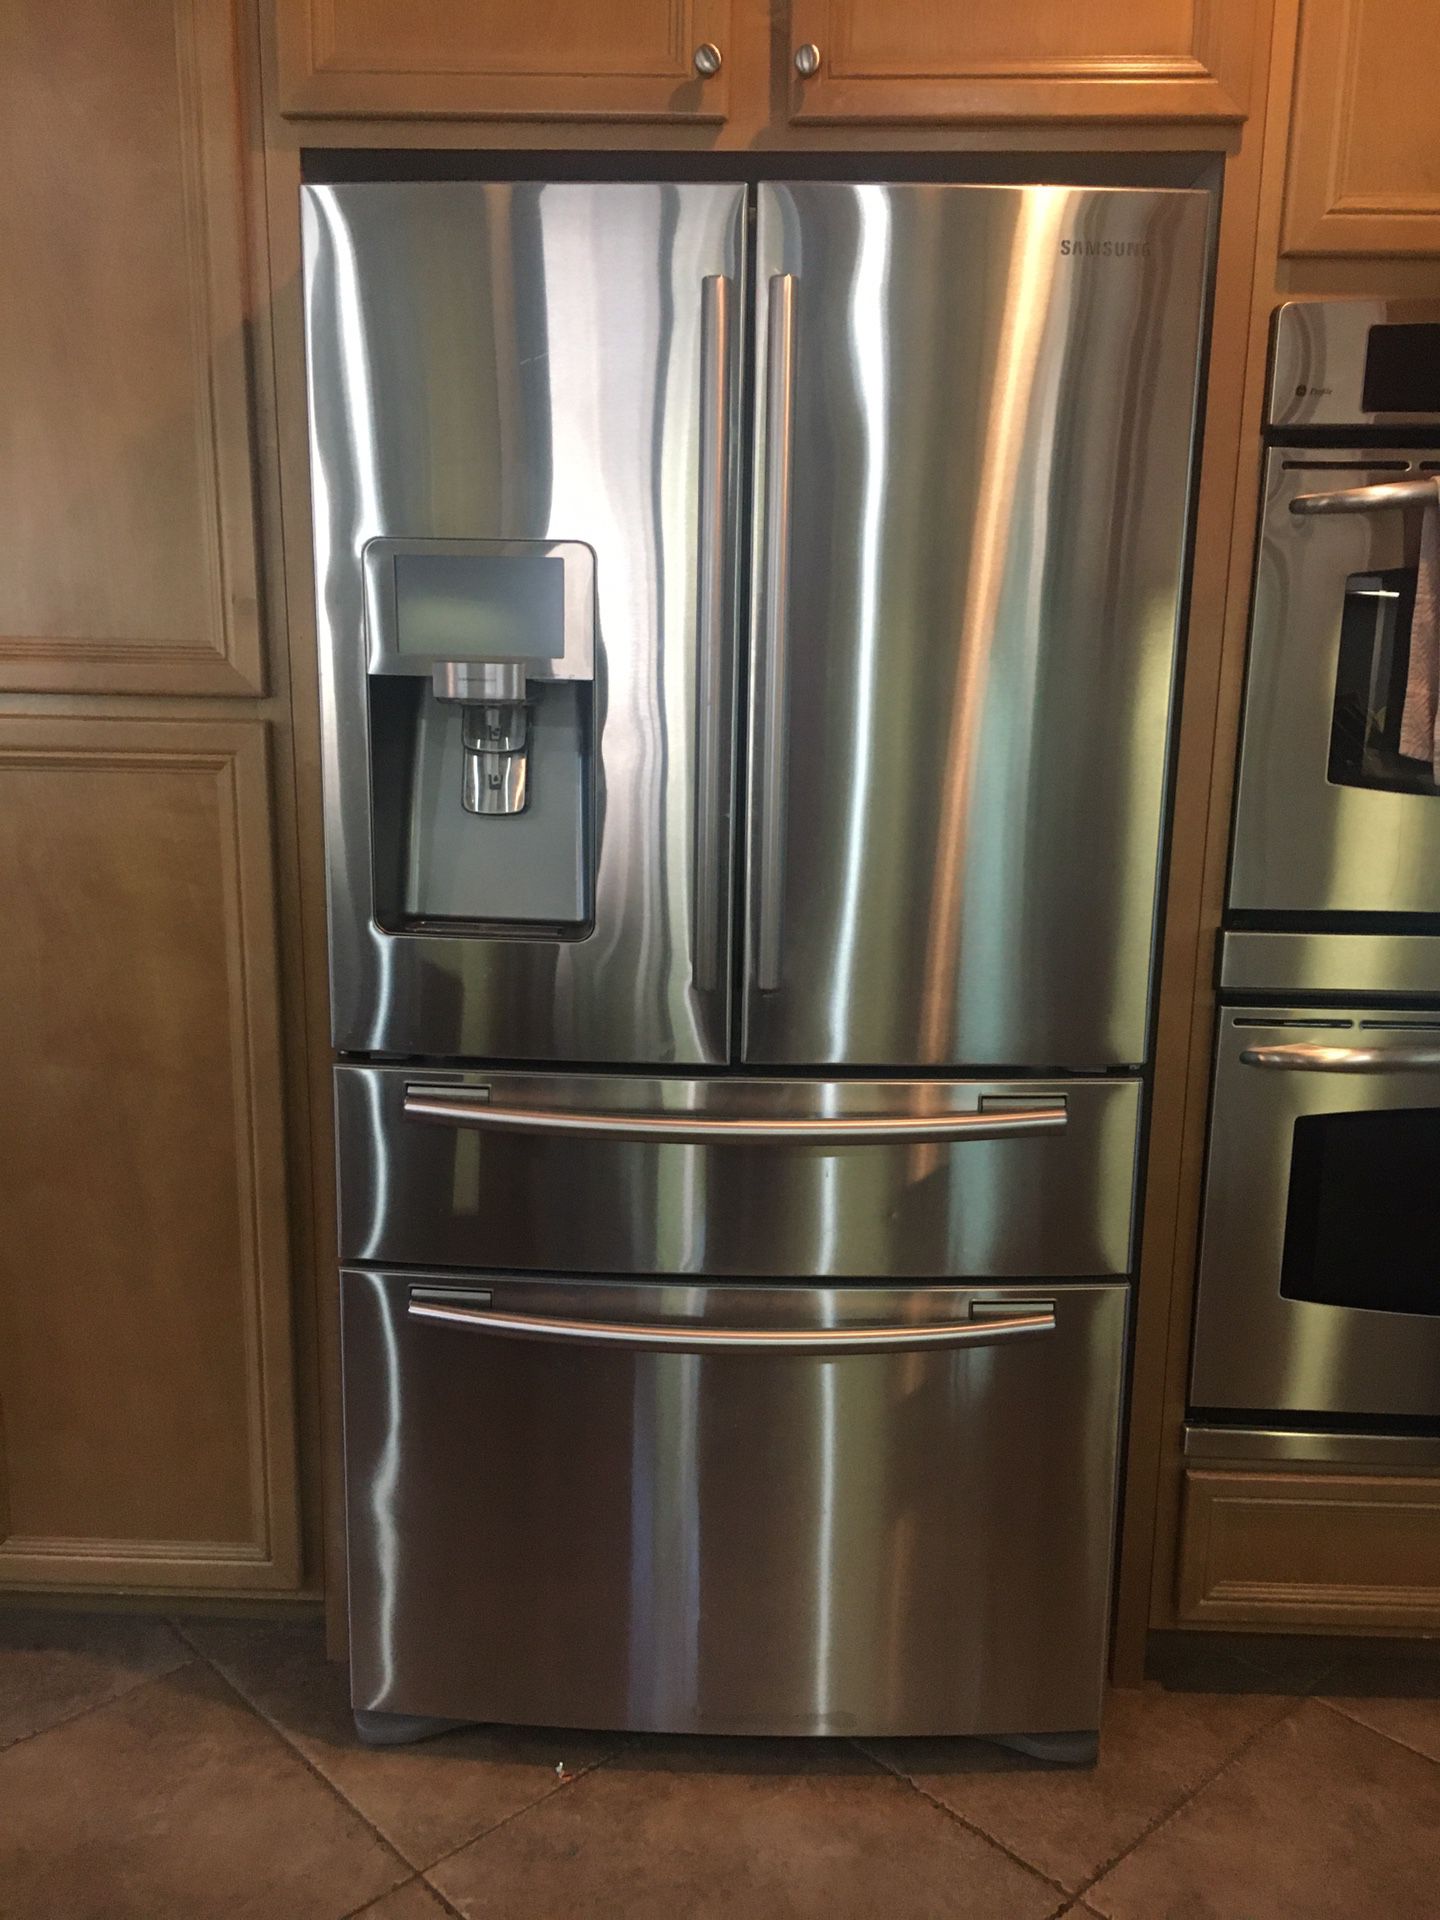 Samsung Refrigerator with touch screen